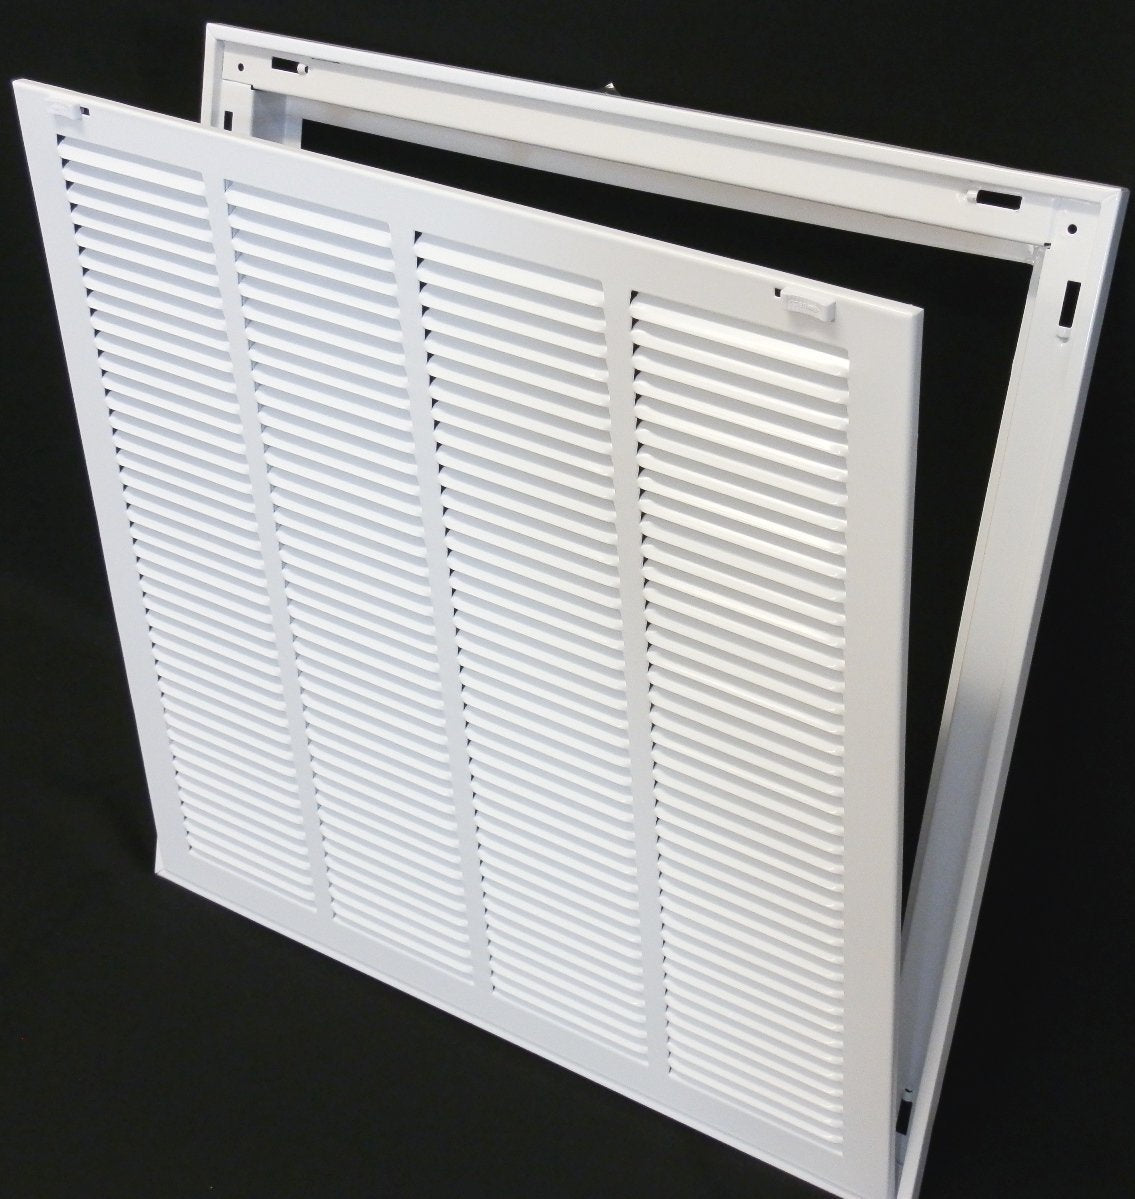 8&quot; X 22&quot; Steel Return Air Filter Grille for 1&quot; Filter - Removable Frame - [Outer Dimensions: 10 5/8&quot; X 24 5/8&quot;]